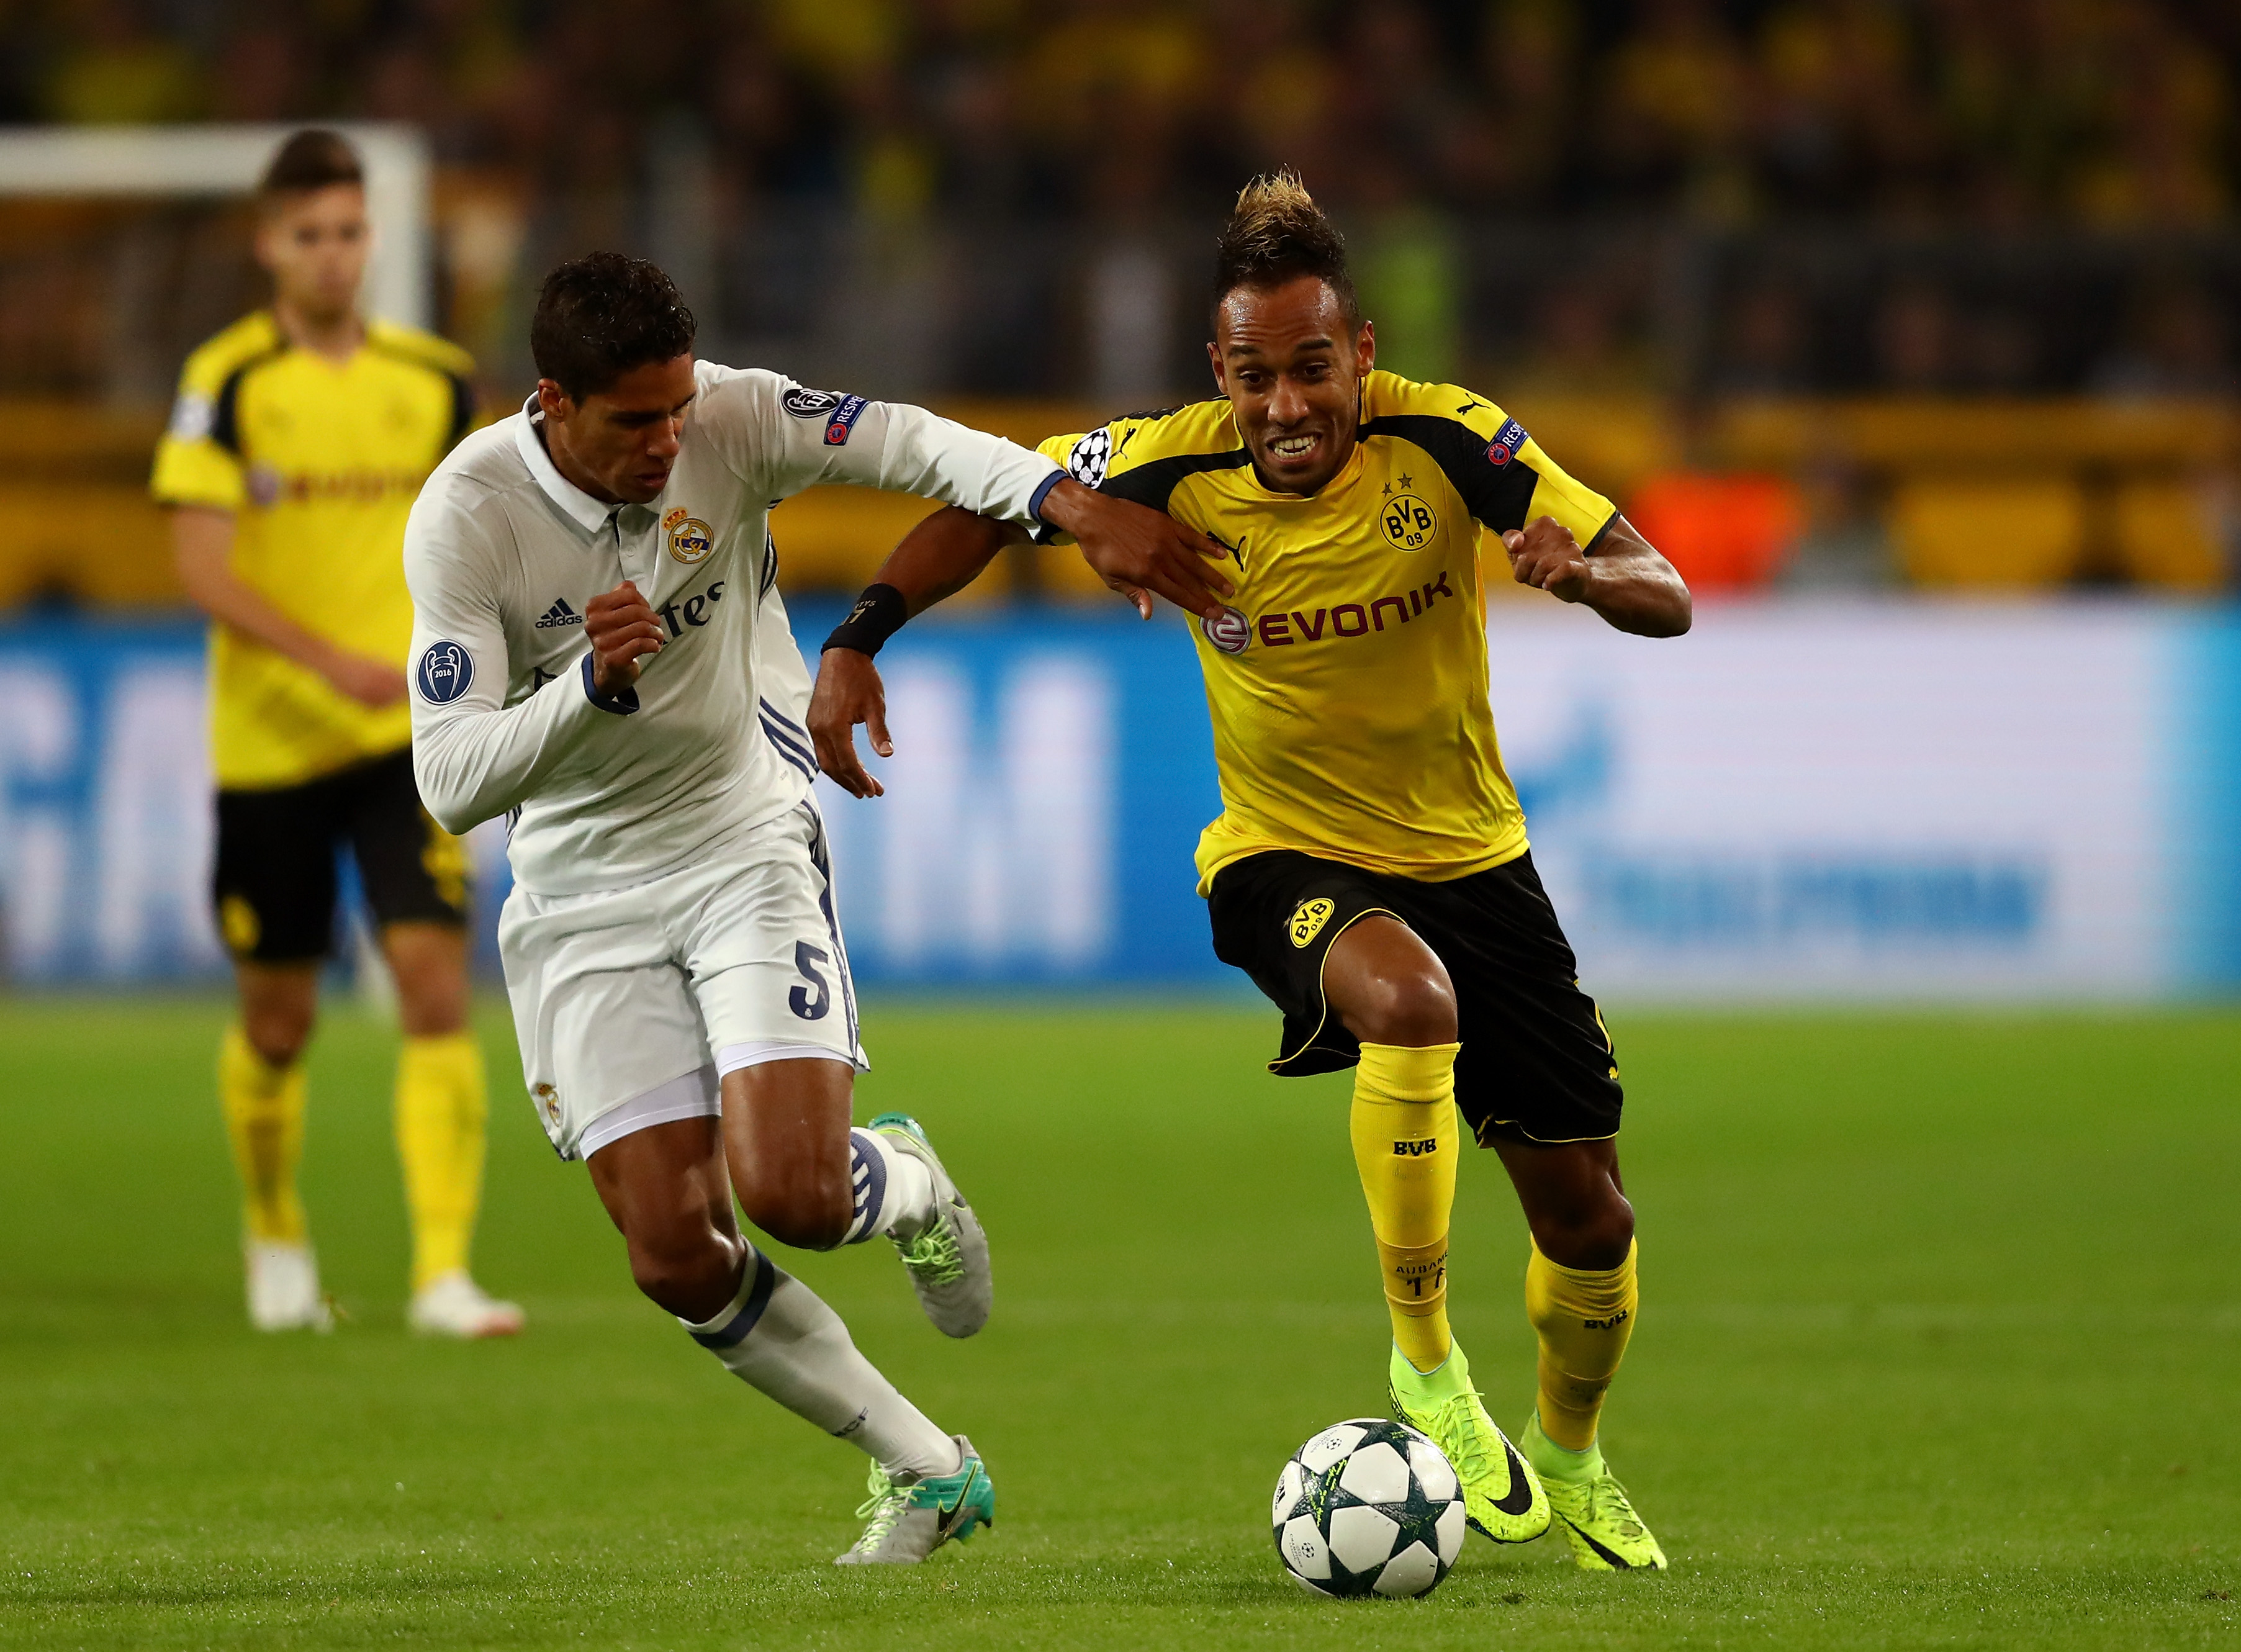 DORTMUND, GERMANY - SEPTEMBER 27:  Raphael Varane of Real Madrid and Pierre-Emerick Aubameyang of Borussia Dortmund battle for the bal during the UEFA Champions League Group F match between Borussia Dortmund and Real Madrid CF at Signal Iduna Park on September 27, 2016 in Dortmund, North Rhine-Westphalia.  (Photo by Dean Mouhtaropoulos/Bongarts/Getty Images)